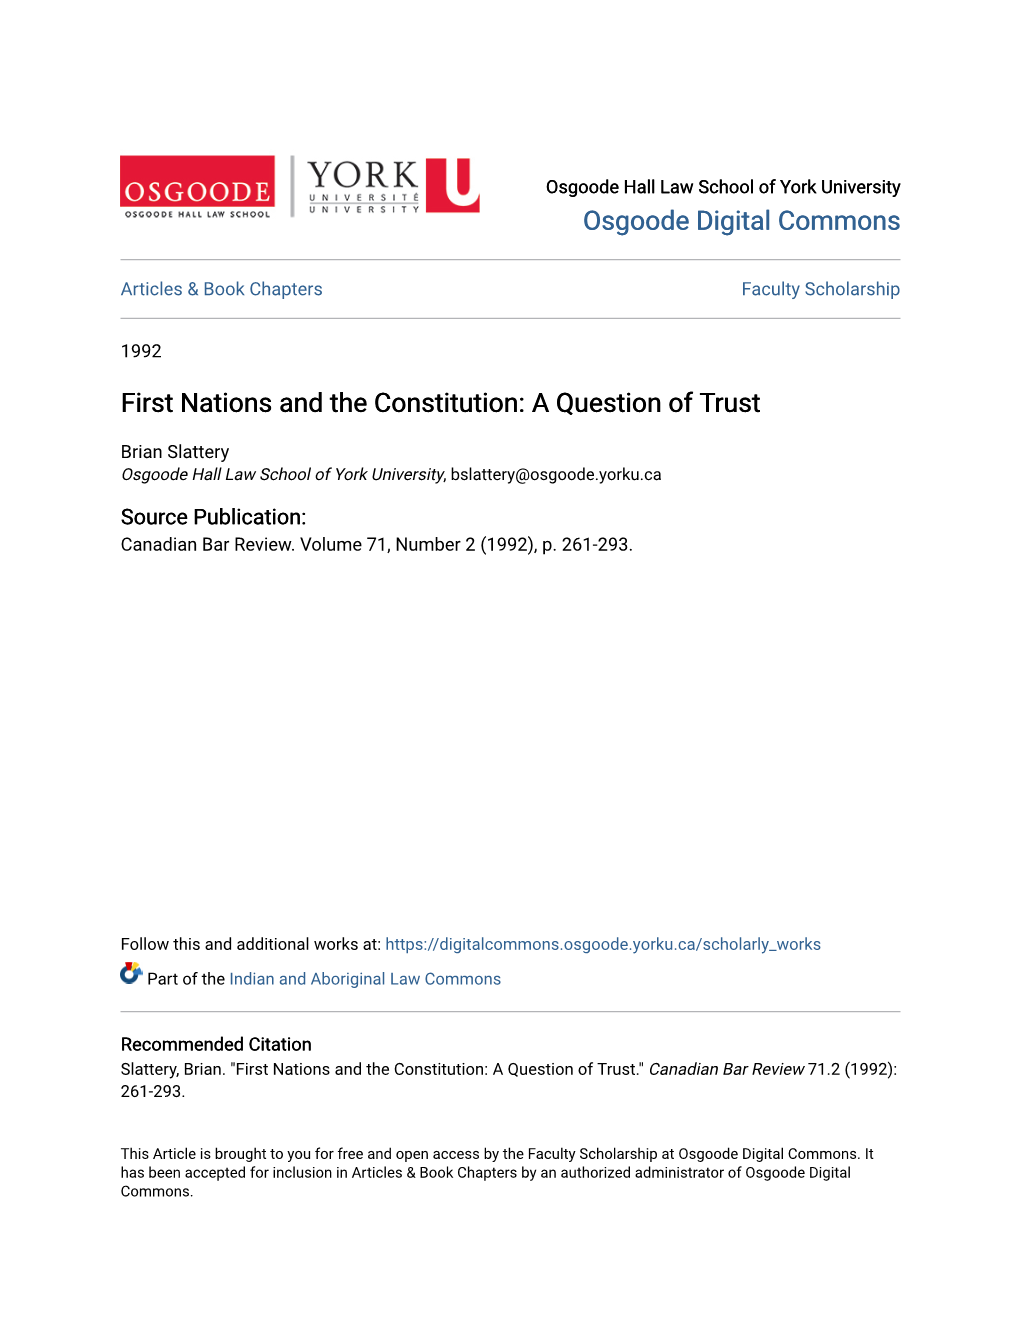 First Nations and the Constitution: a Question of Trust